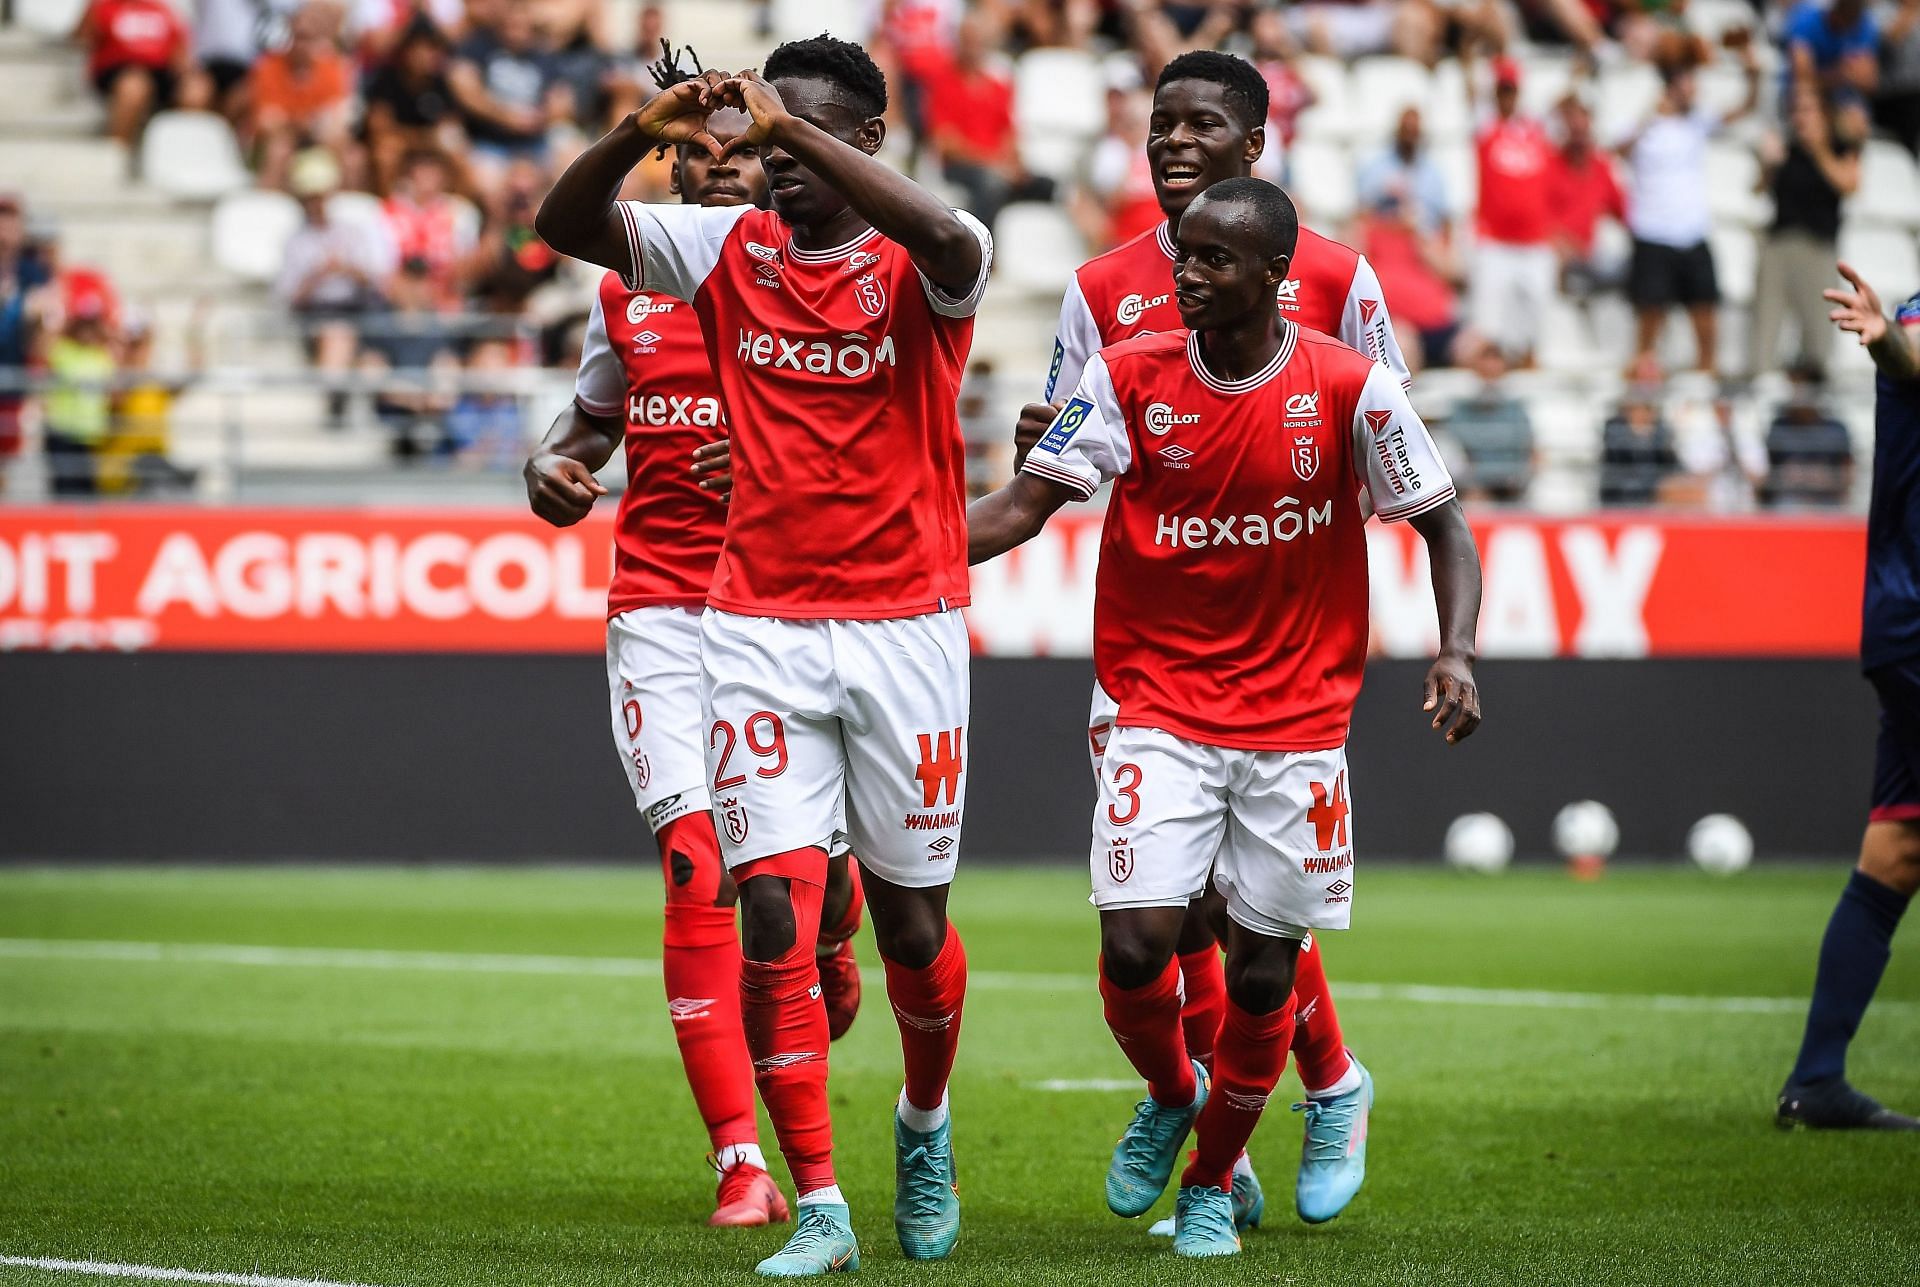 Can Folarin Balogun find the net for Reims again this weekend when they face Toulouse?